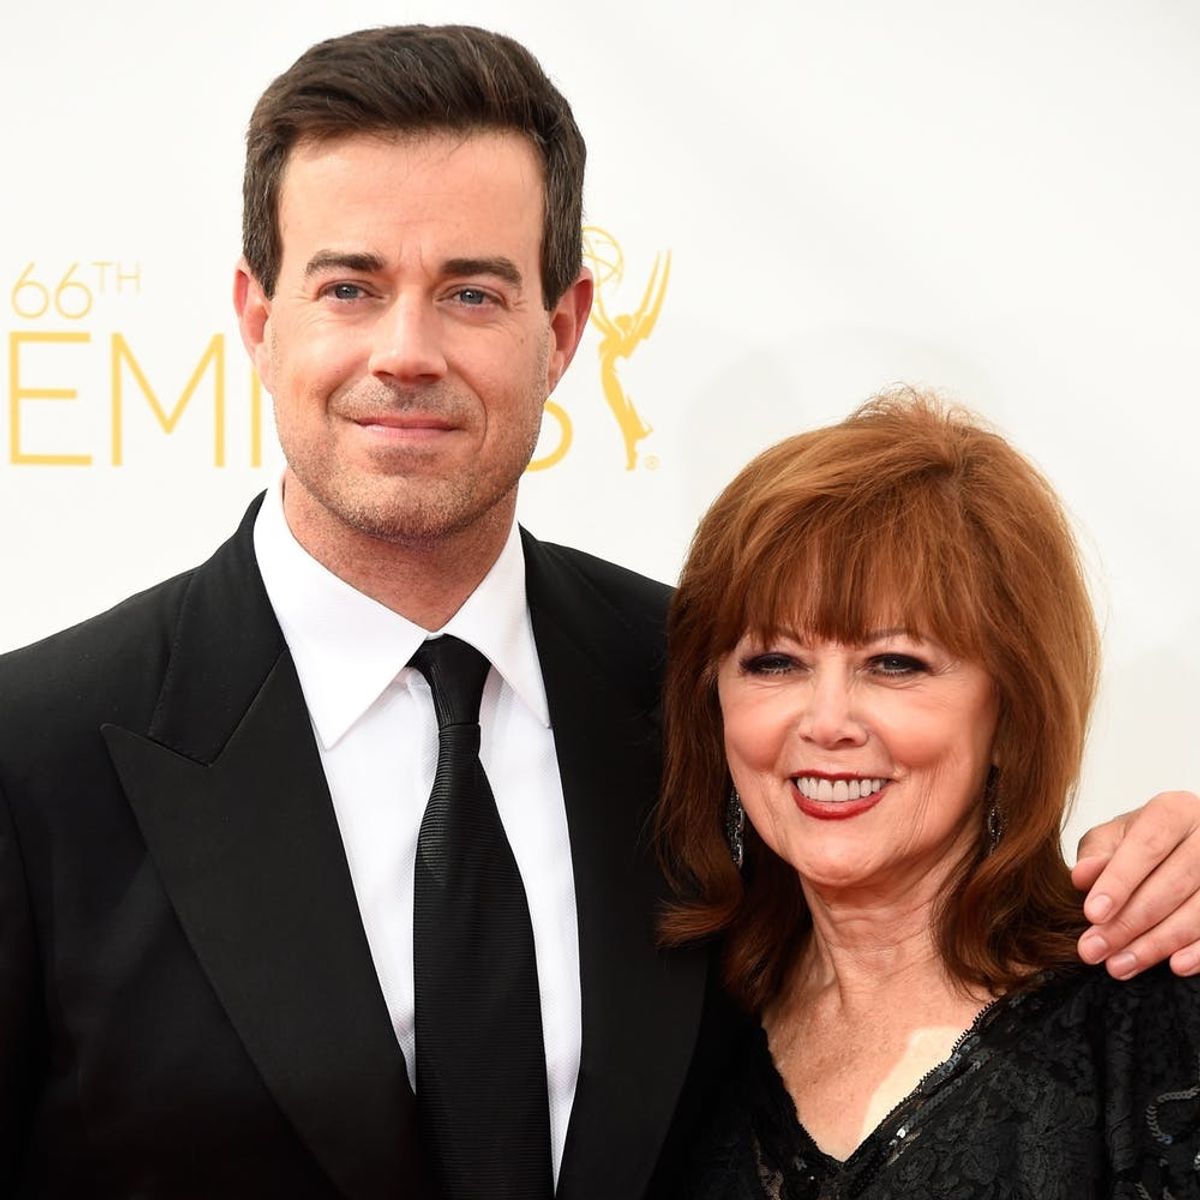 Carson Daly Honors His Mother in an Emotional First Statement After Her Death